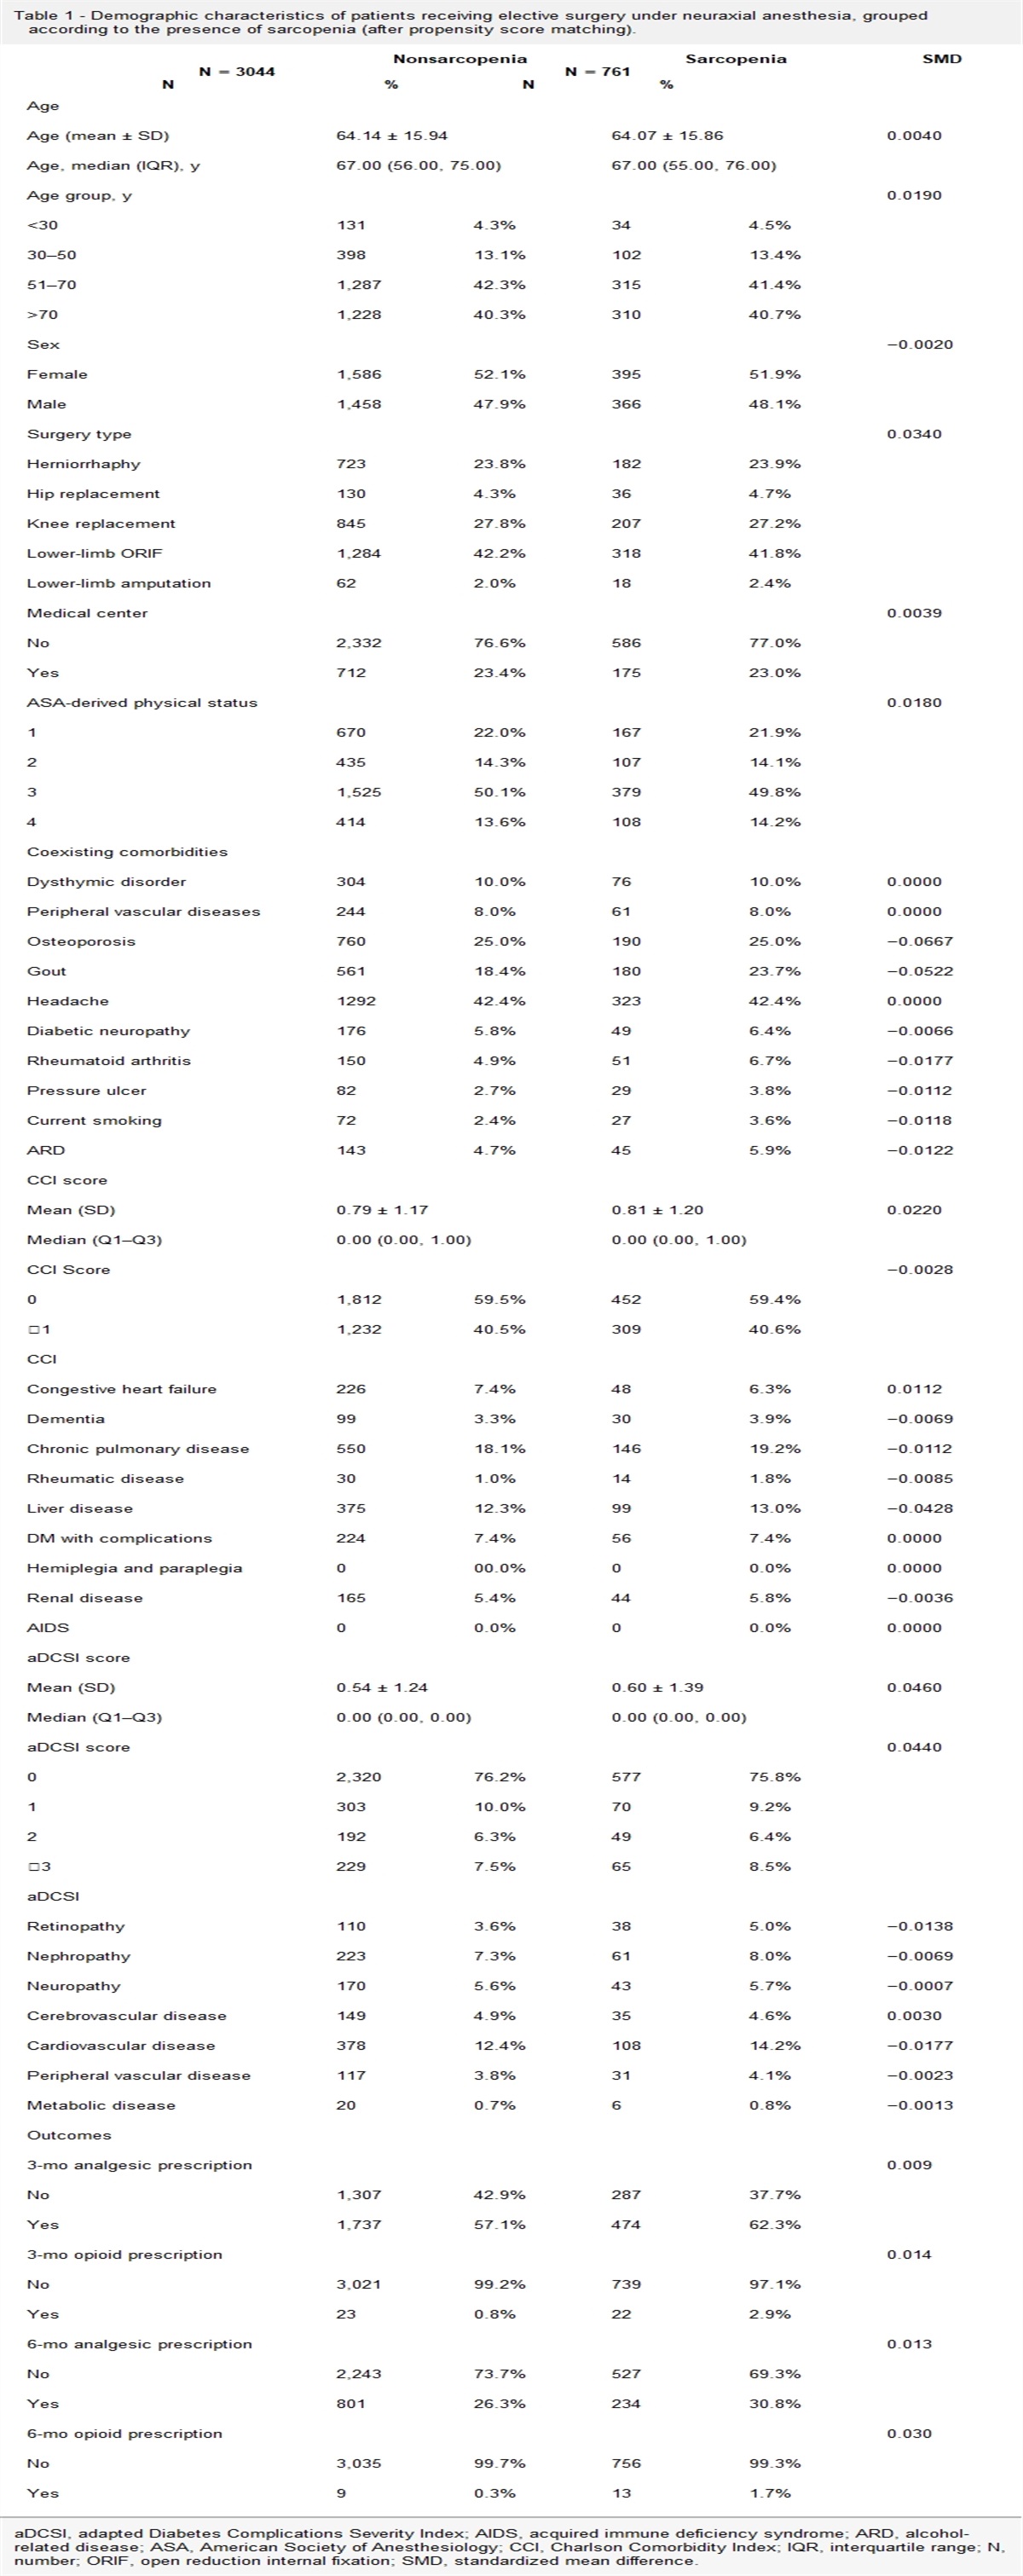 Persistence of analgesic usage and opioid consumption in sarcopenic patients undergoing neuraxial anesthesia: a nationwide retrospective cohort study